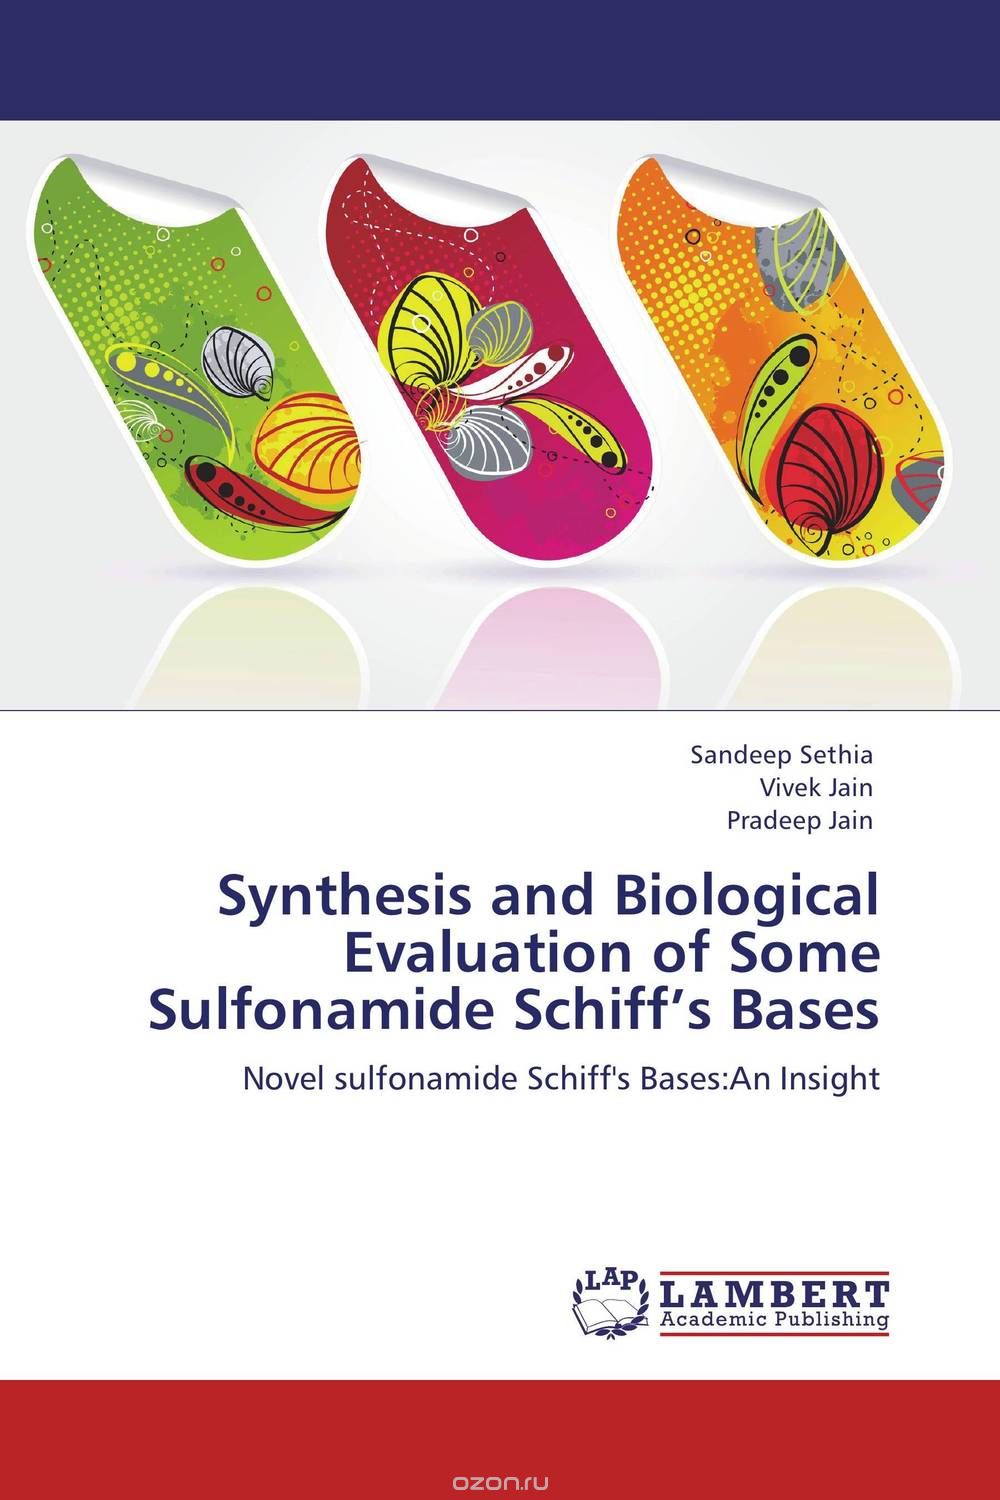 Synthesis and Biological Evaluation of Some Sulfonamide Schiff’s Bases